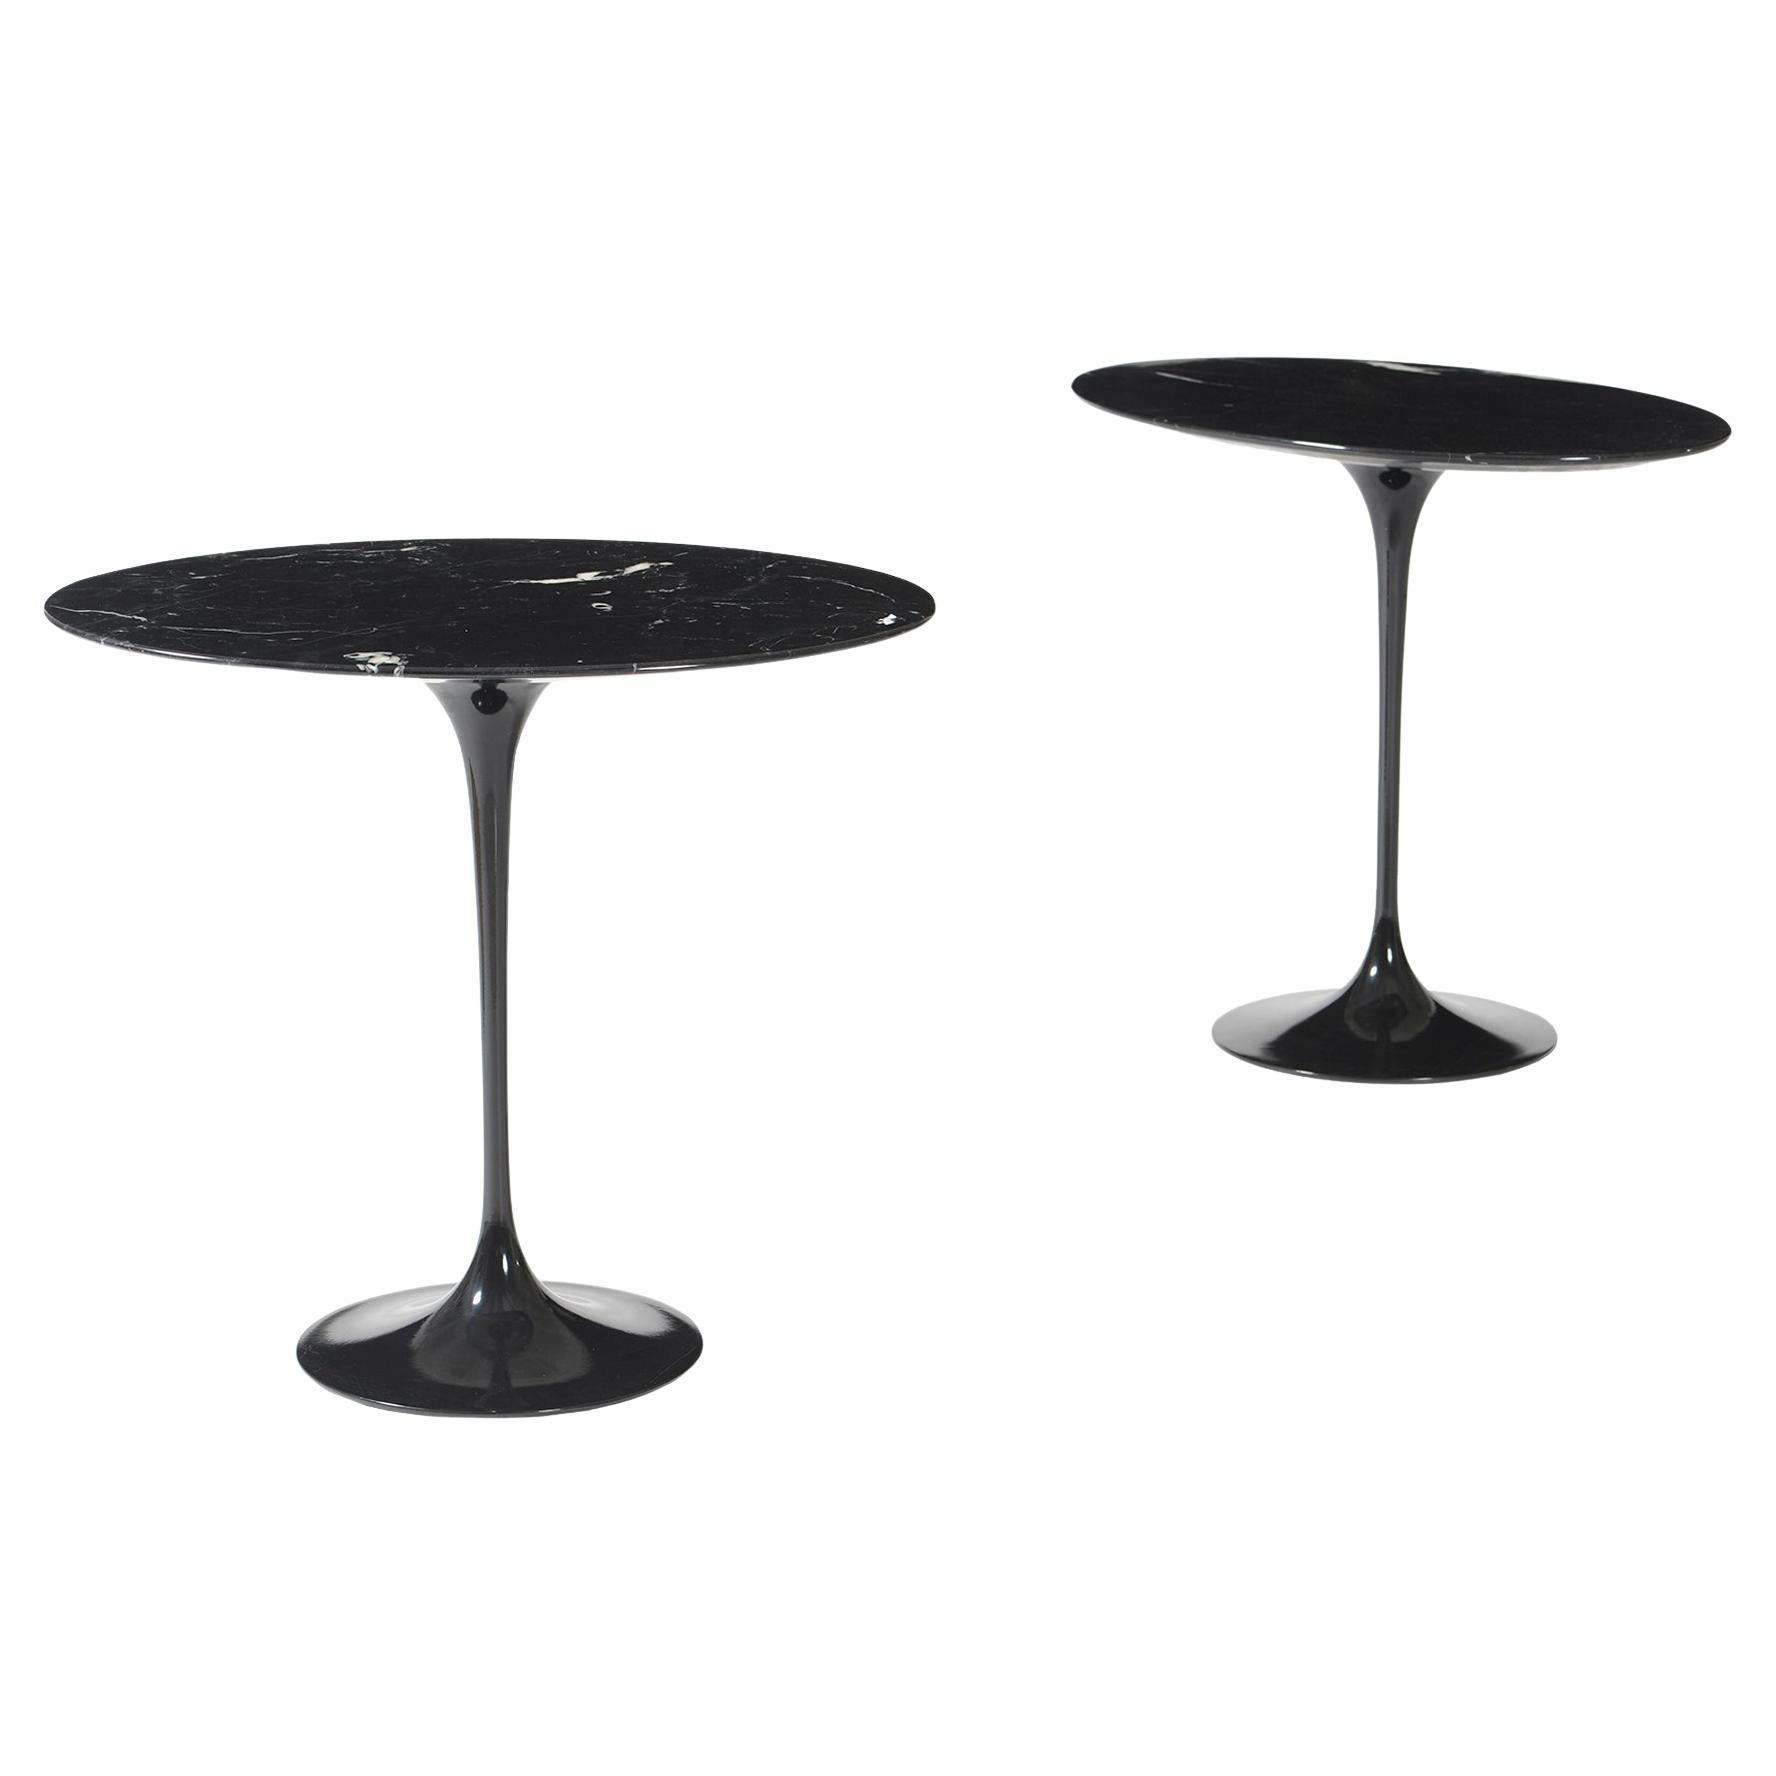 Pair of Side Tables Mod Tulip Designed by Eero Saarinen for Knoll